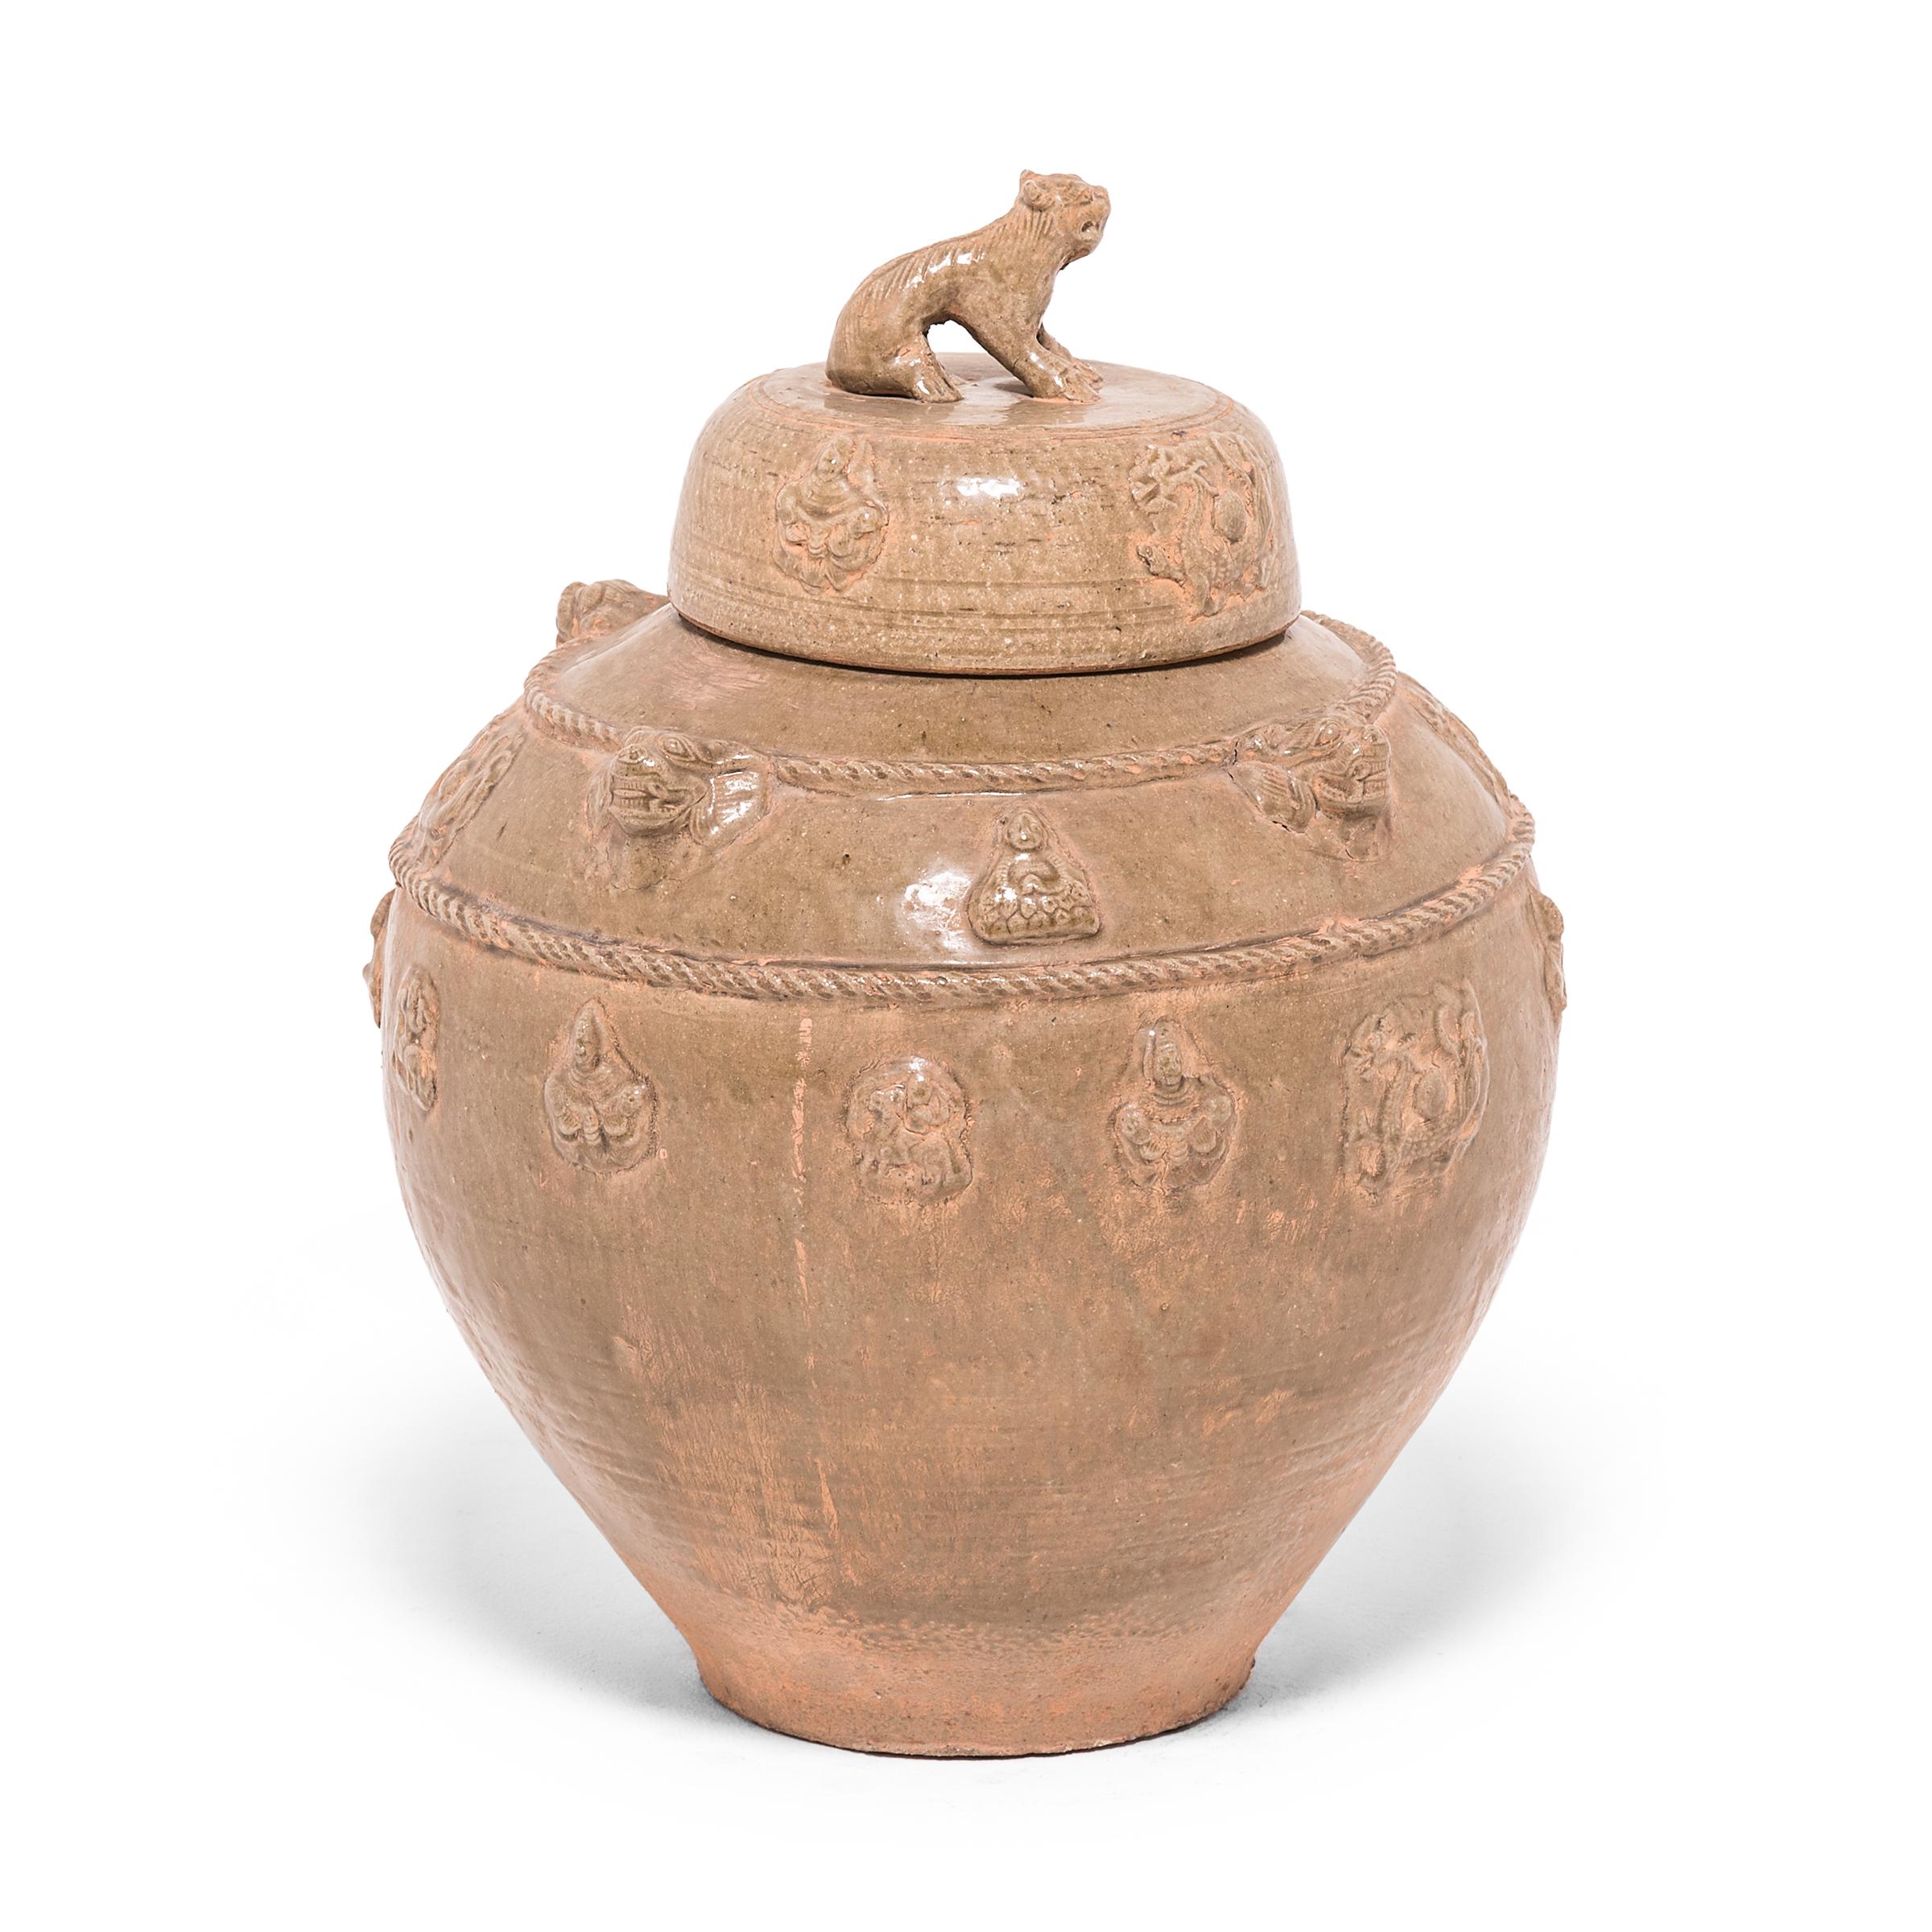 This ceramic vessel was handcrafted in the Jiangxi region of China in the spirit of ancient temple jars. The style and glaze is reminiscent of Han dynasty burial vessels designed to store wine for passage to the afterlife. The jar is decorated in